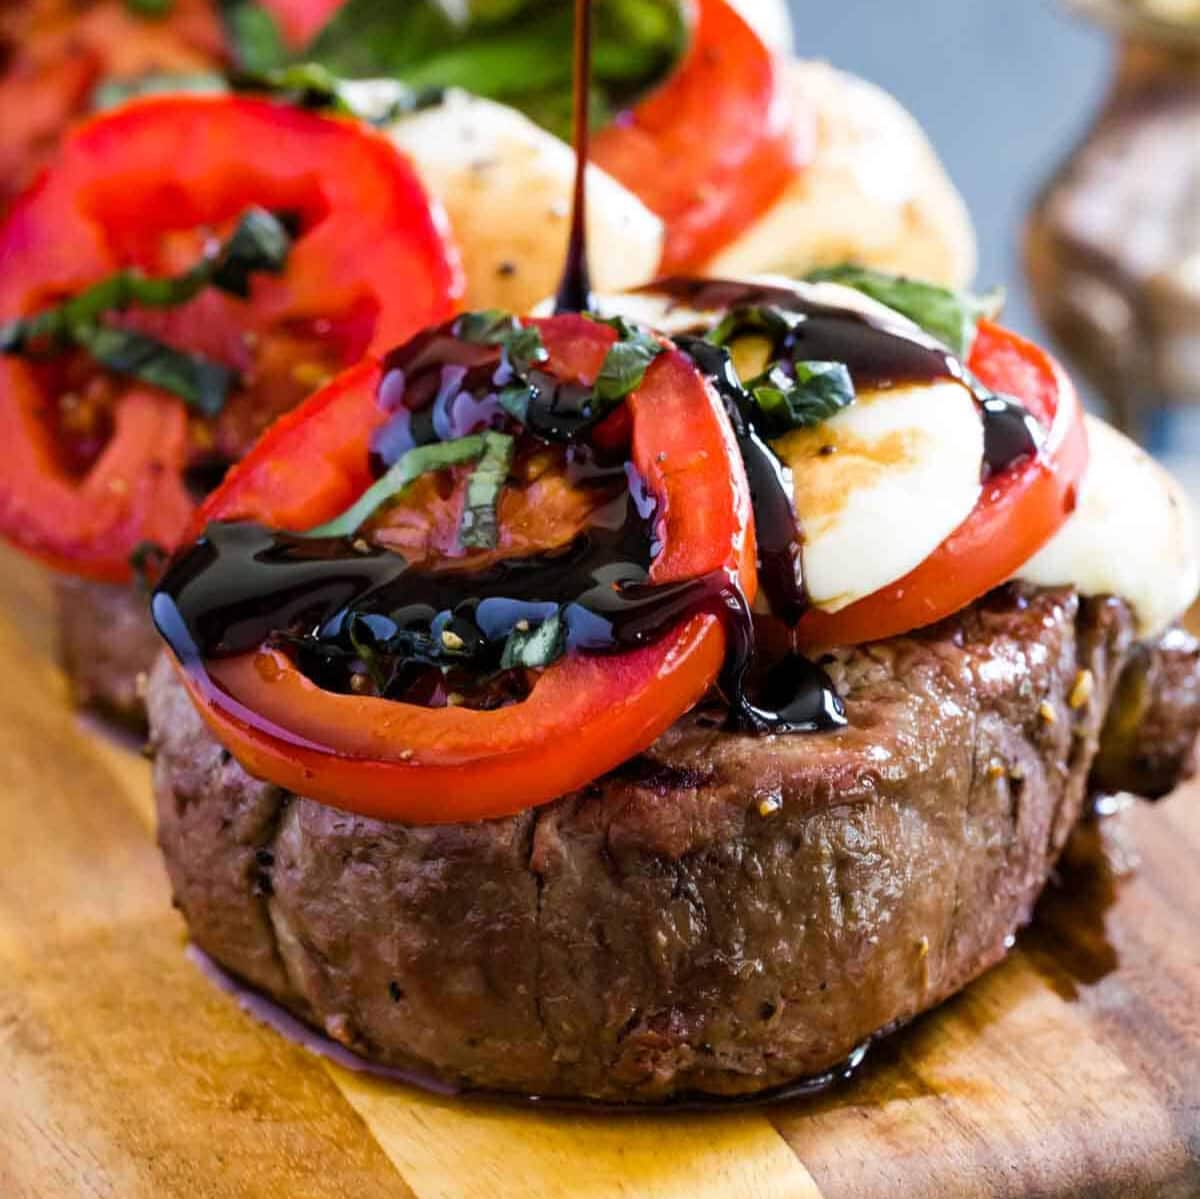 Grilled steak topped with sliced tomatoes, mozzarella, and drizzled with balsamic reduction.